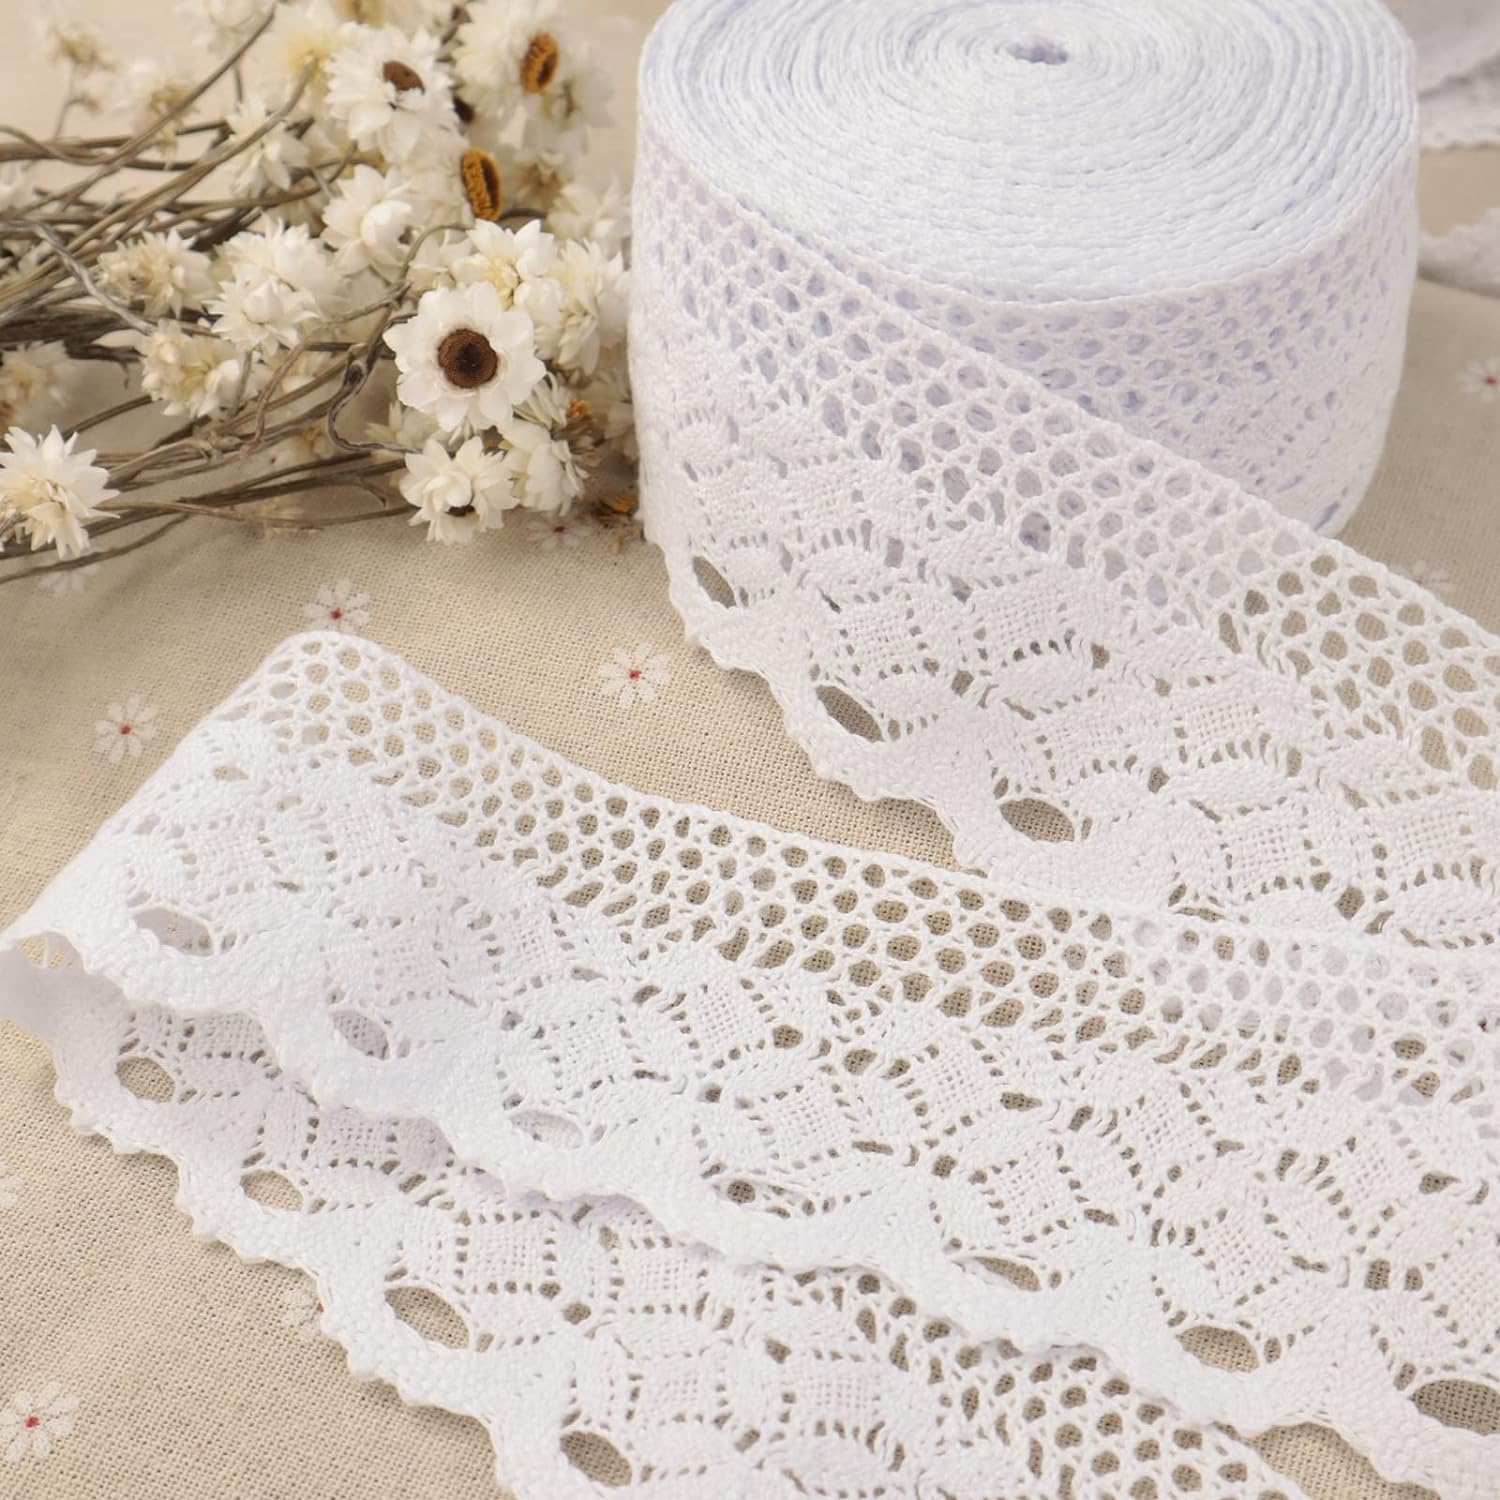 LEMO White Lace Cotton Lace Trim Crochet Sewing Lace for Crafts, Gift Package Wrapping, Bridal Wedding Decoration